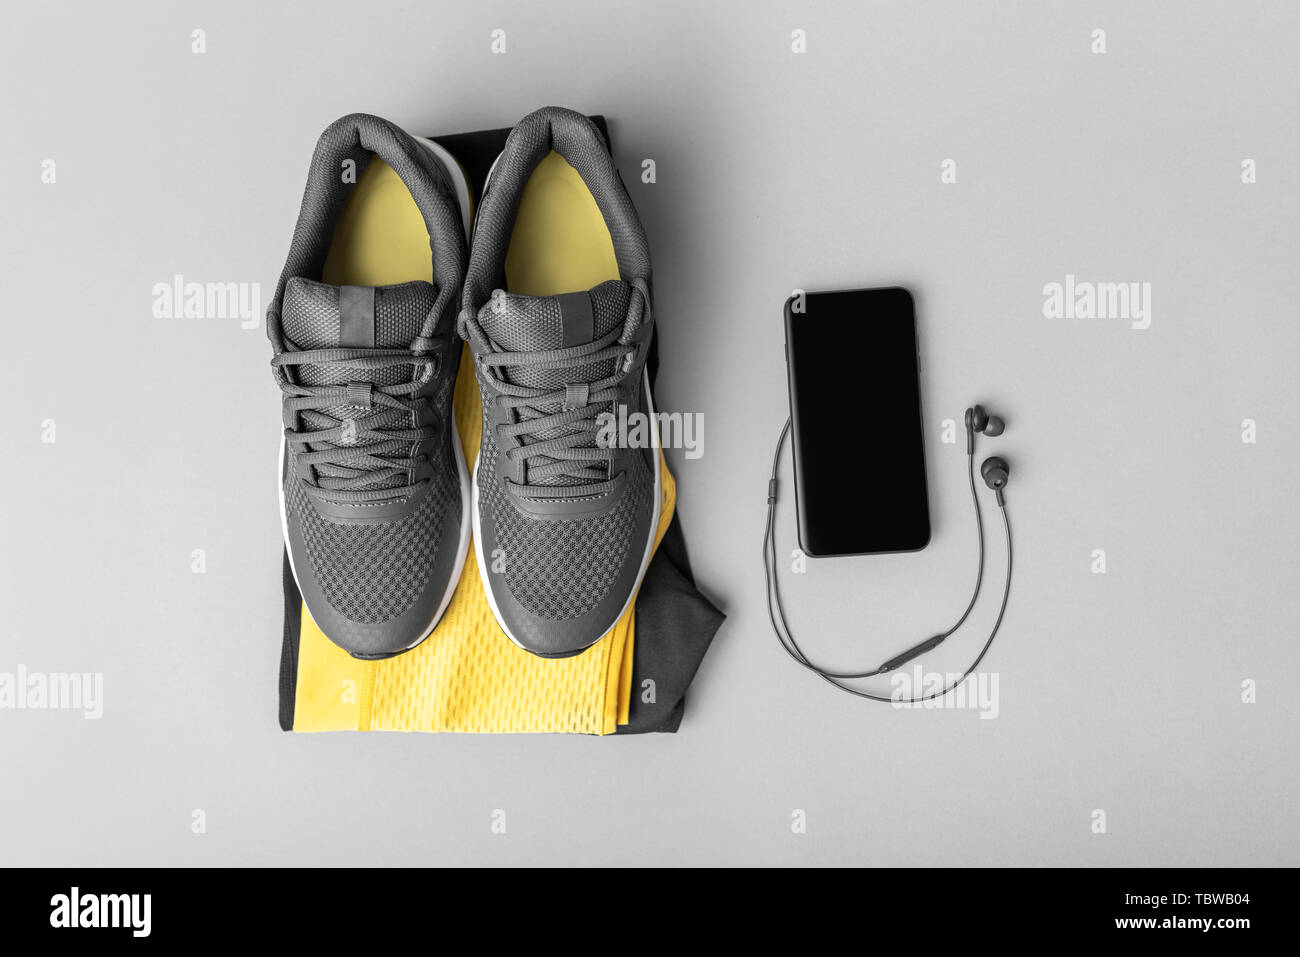 Sneakers sportswear and accessories Stock Photo - Alamy